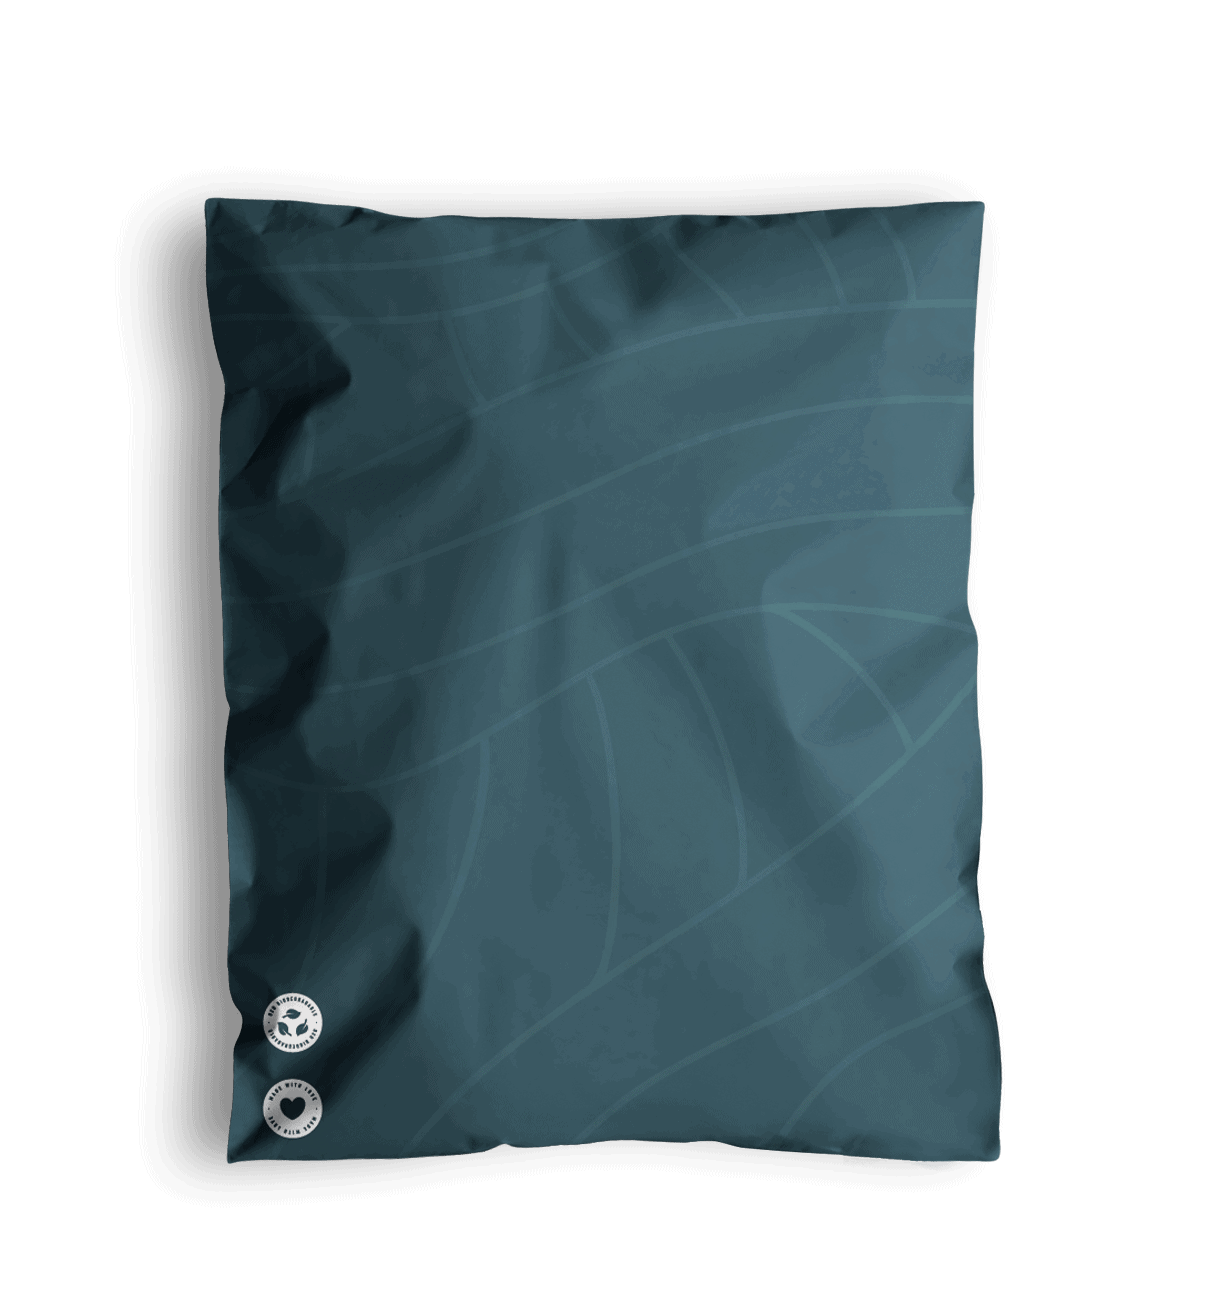 Space Blue Leaf Biodegradable Mailers 14.5" x 19"